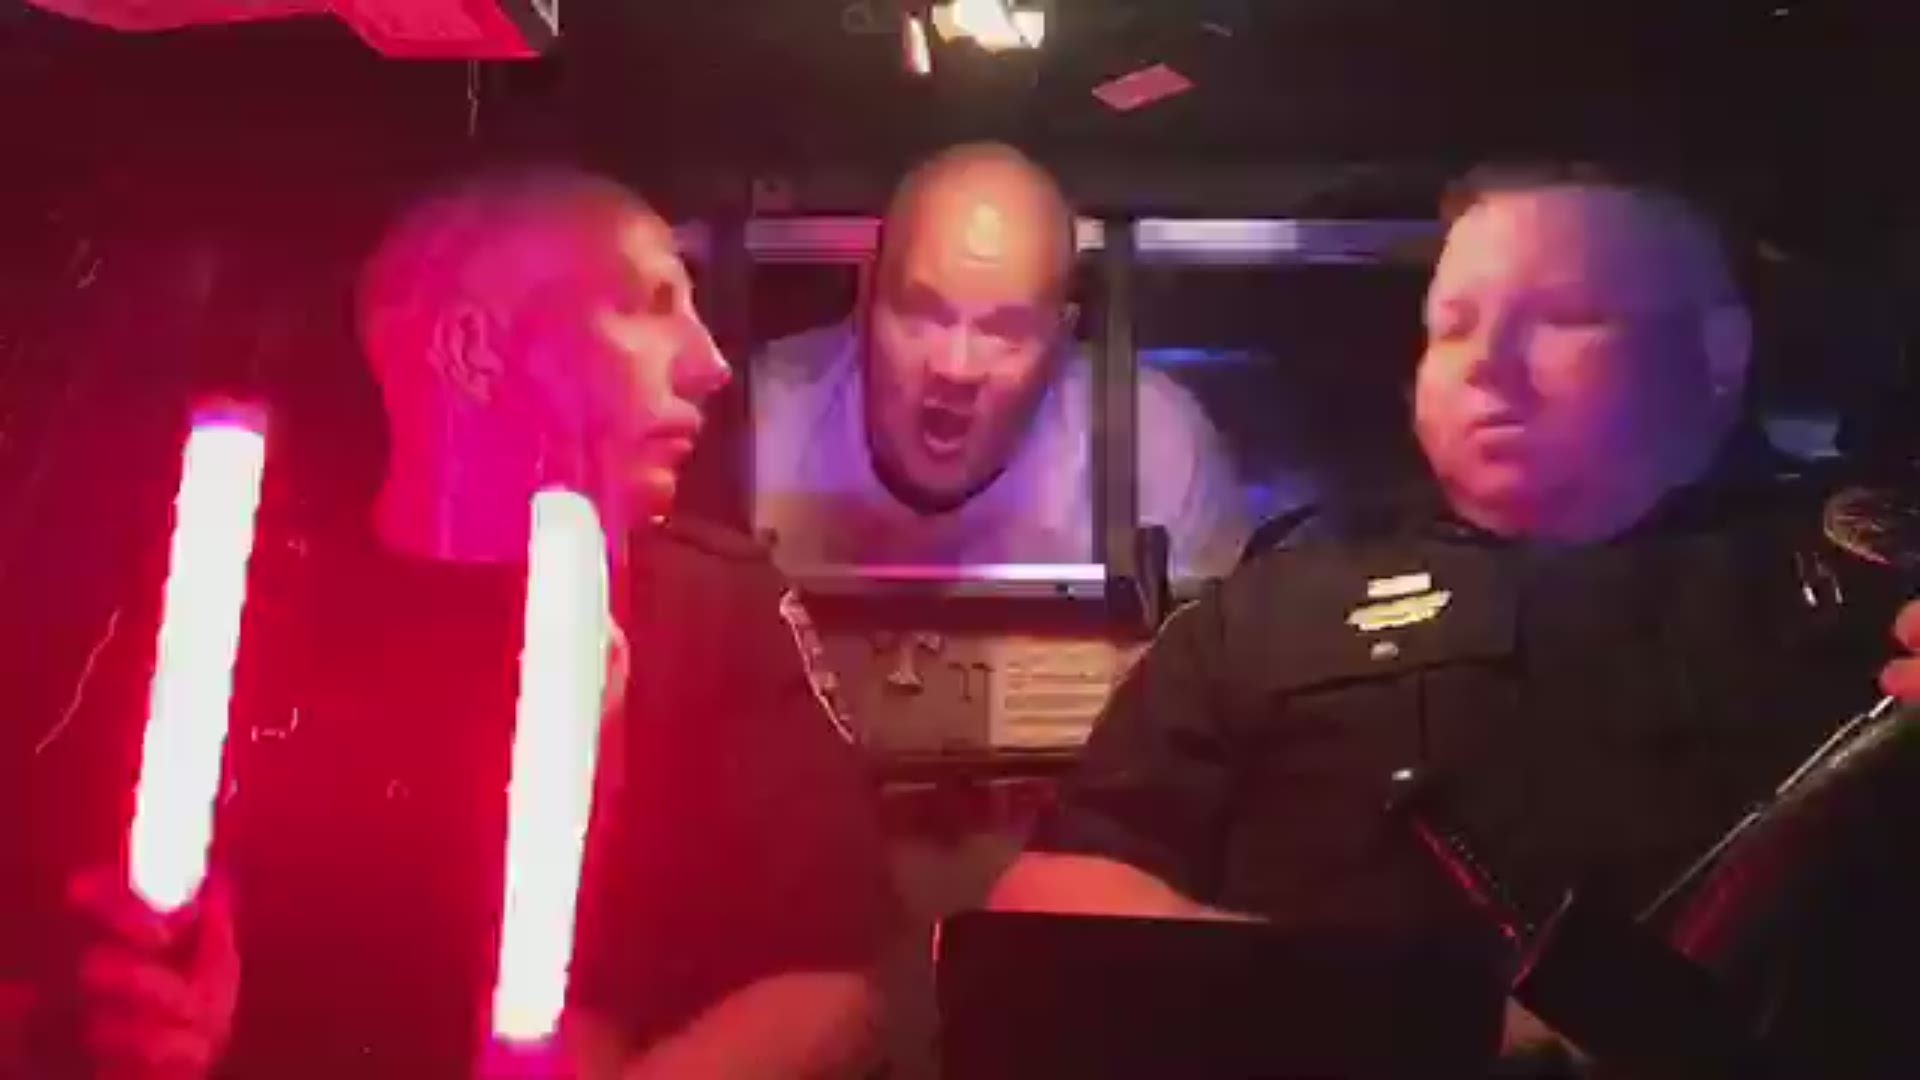 The Dandridge Police Department had some fun with the lip sync challenge!